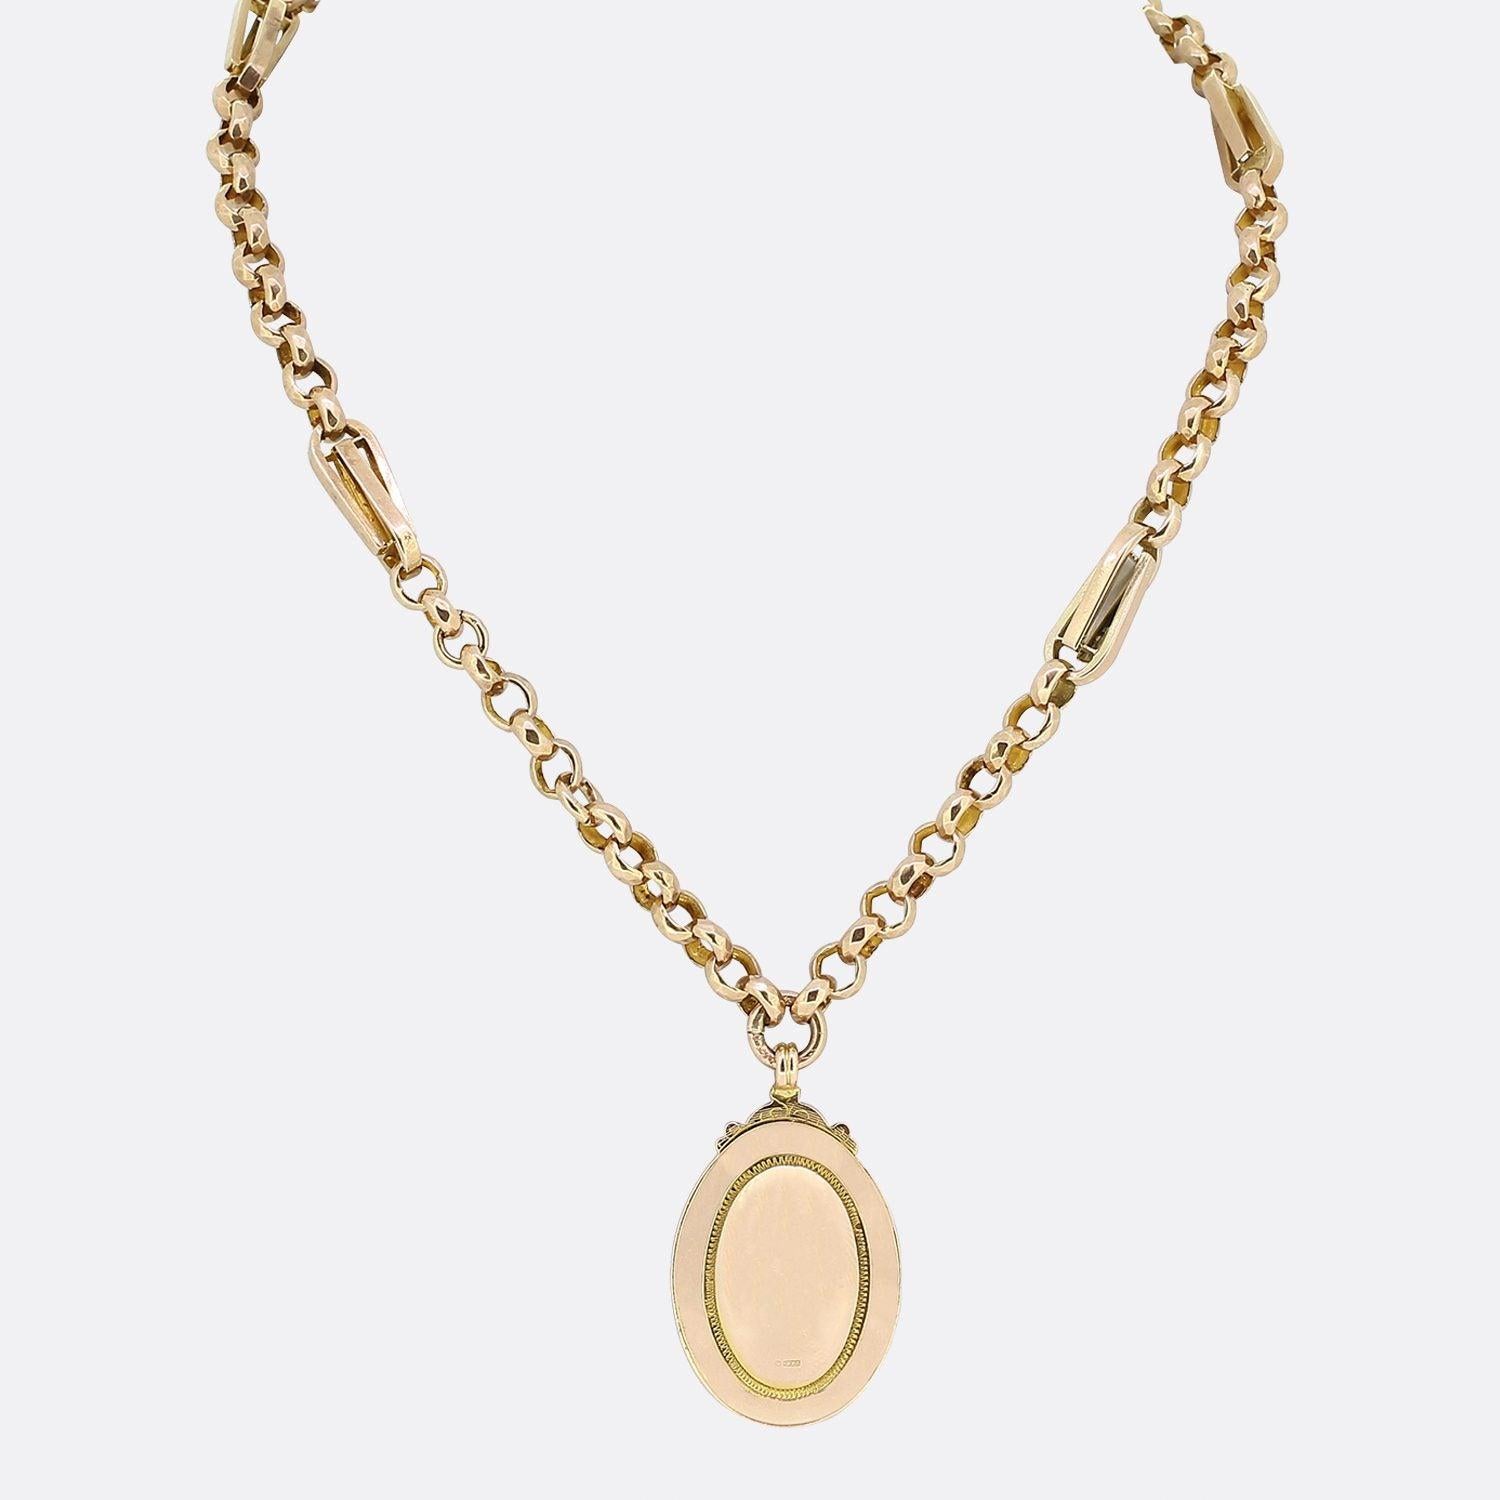 This is a vintage 9ct rose gold necklace. The necklace features a double layered oval shaped plain polished pendant with a geometric engraved boarder.  This piece is suspended from a fancy link chain and is secured with a vintage swivel